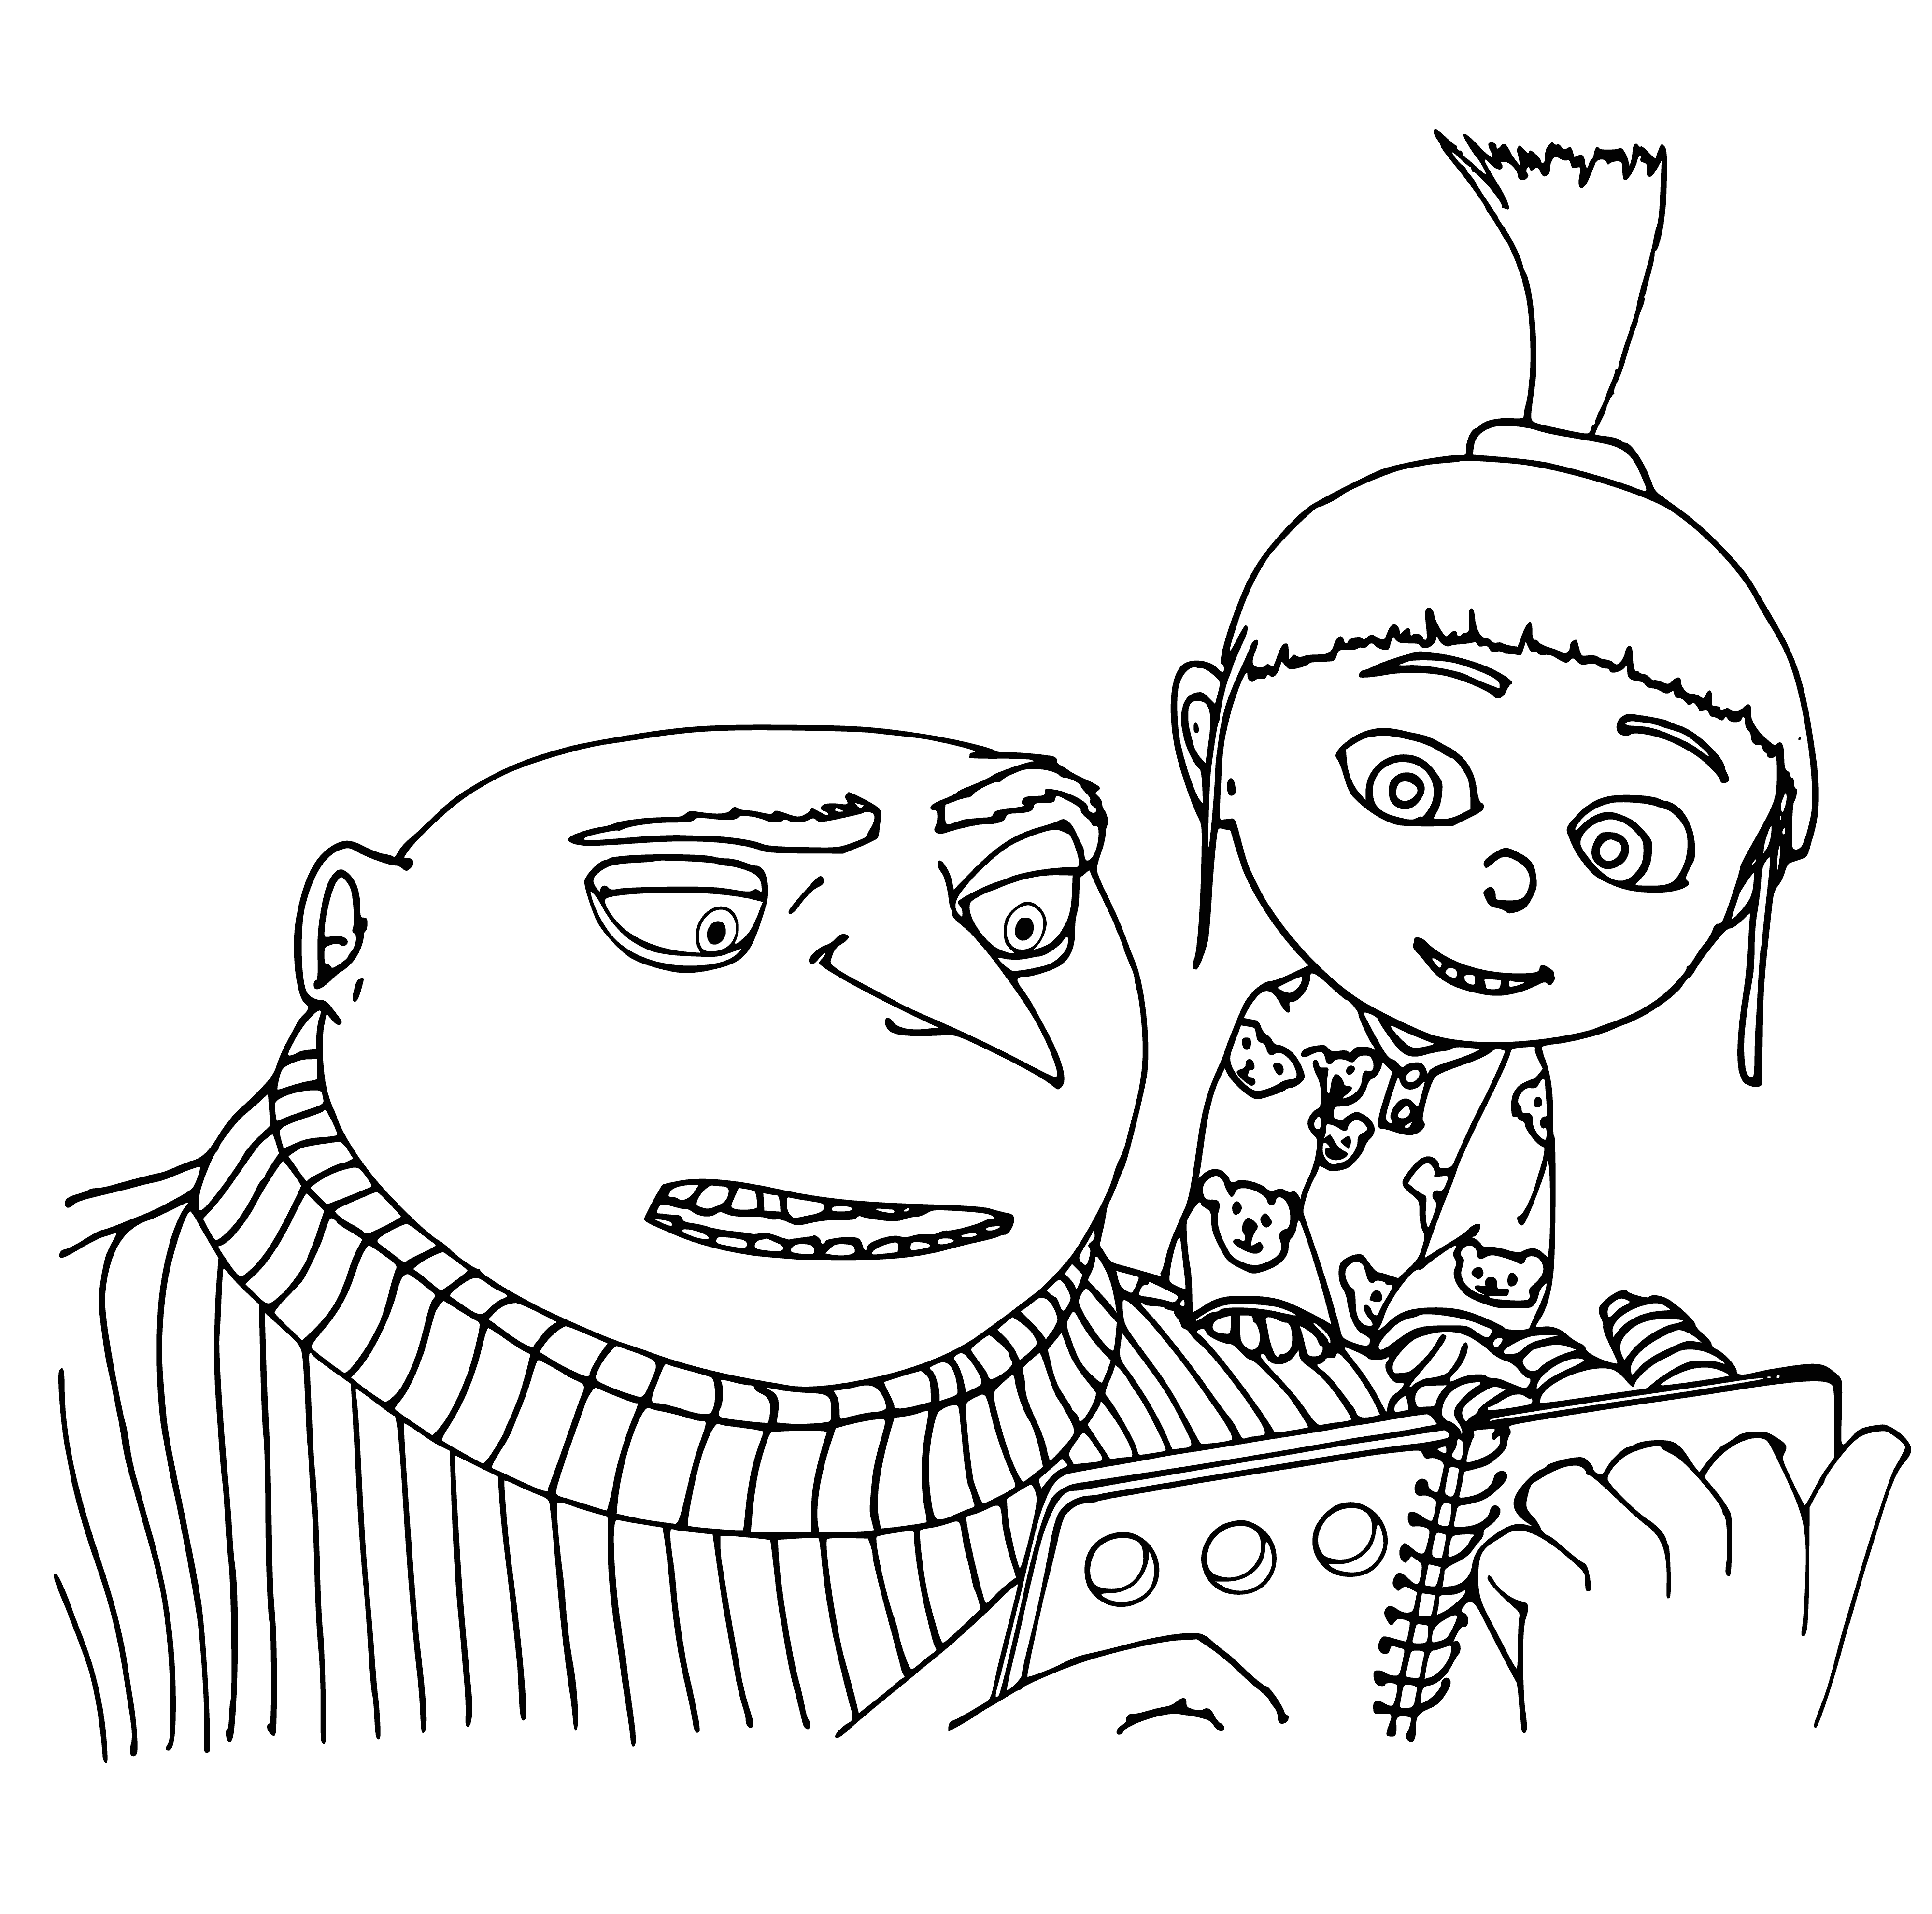 Agnes and Grew coloring page